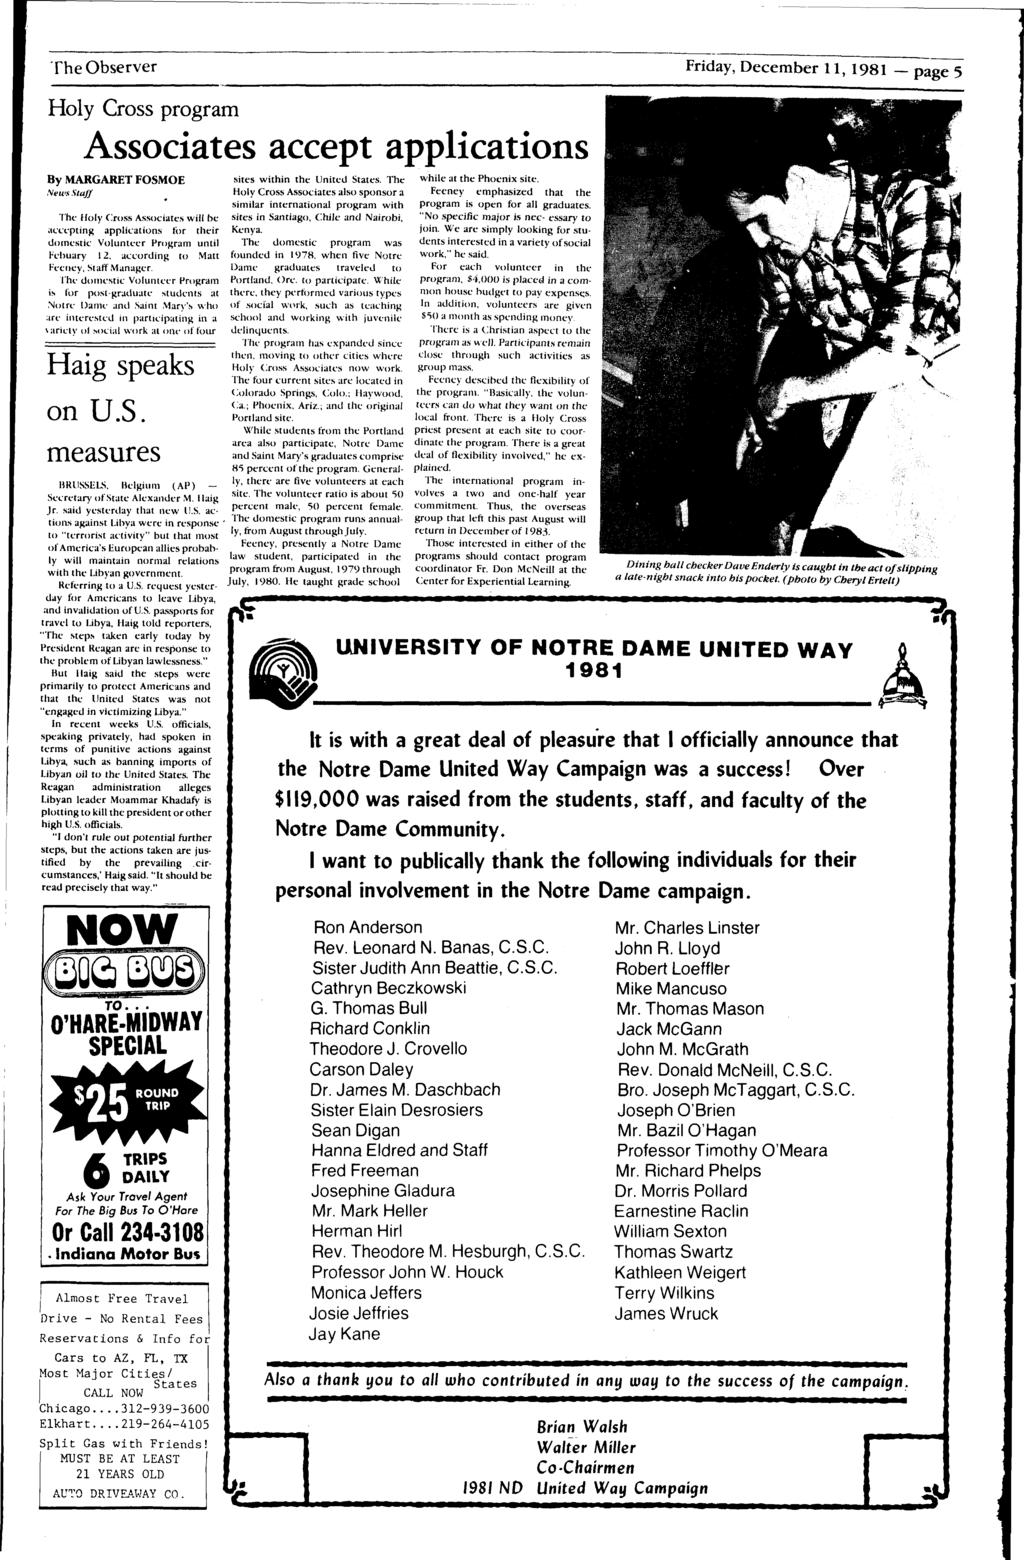 -------------------------------------- The Observer Friday, December 11, 1981 -page 5 Holy Cross program Associaes accep applicaions By MARGARET FOSMOE sies wihin he Unied Saes.